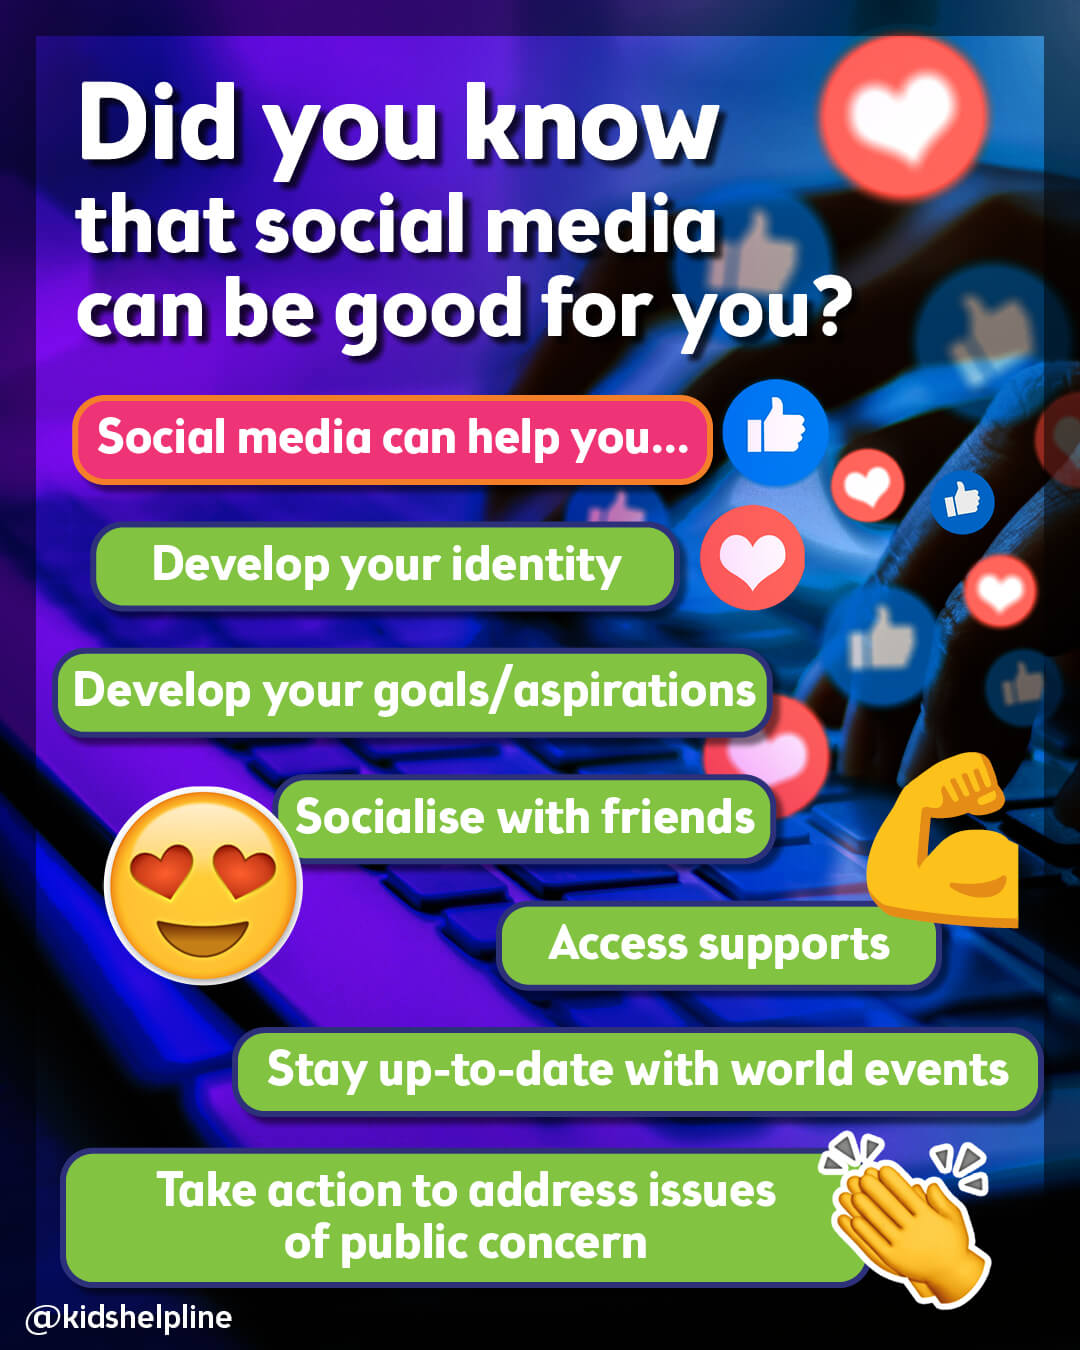 Social can be good for you